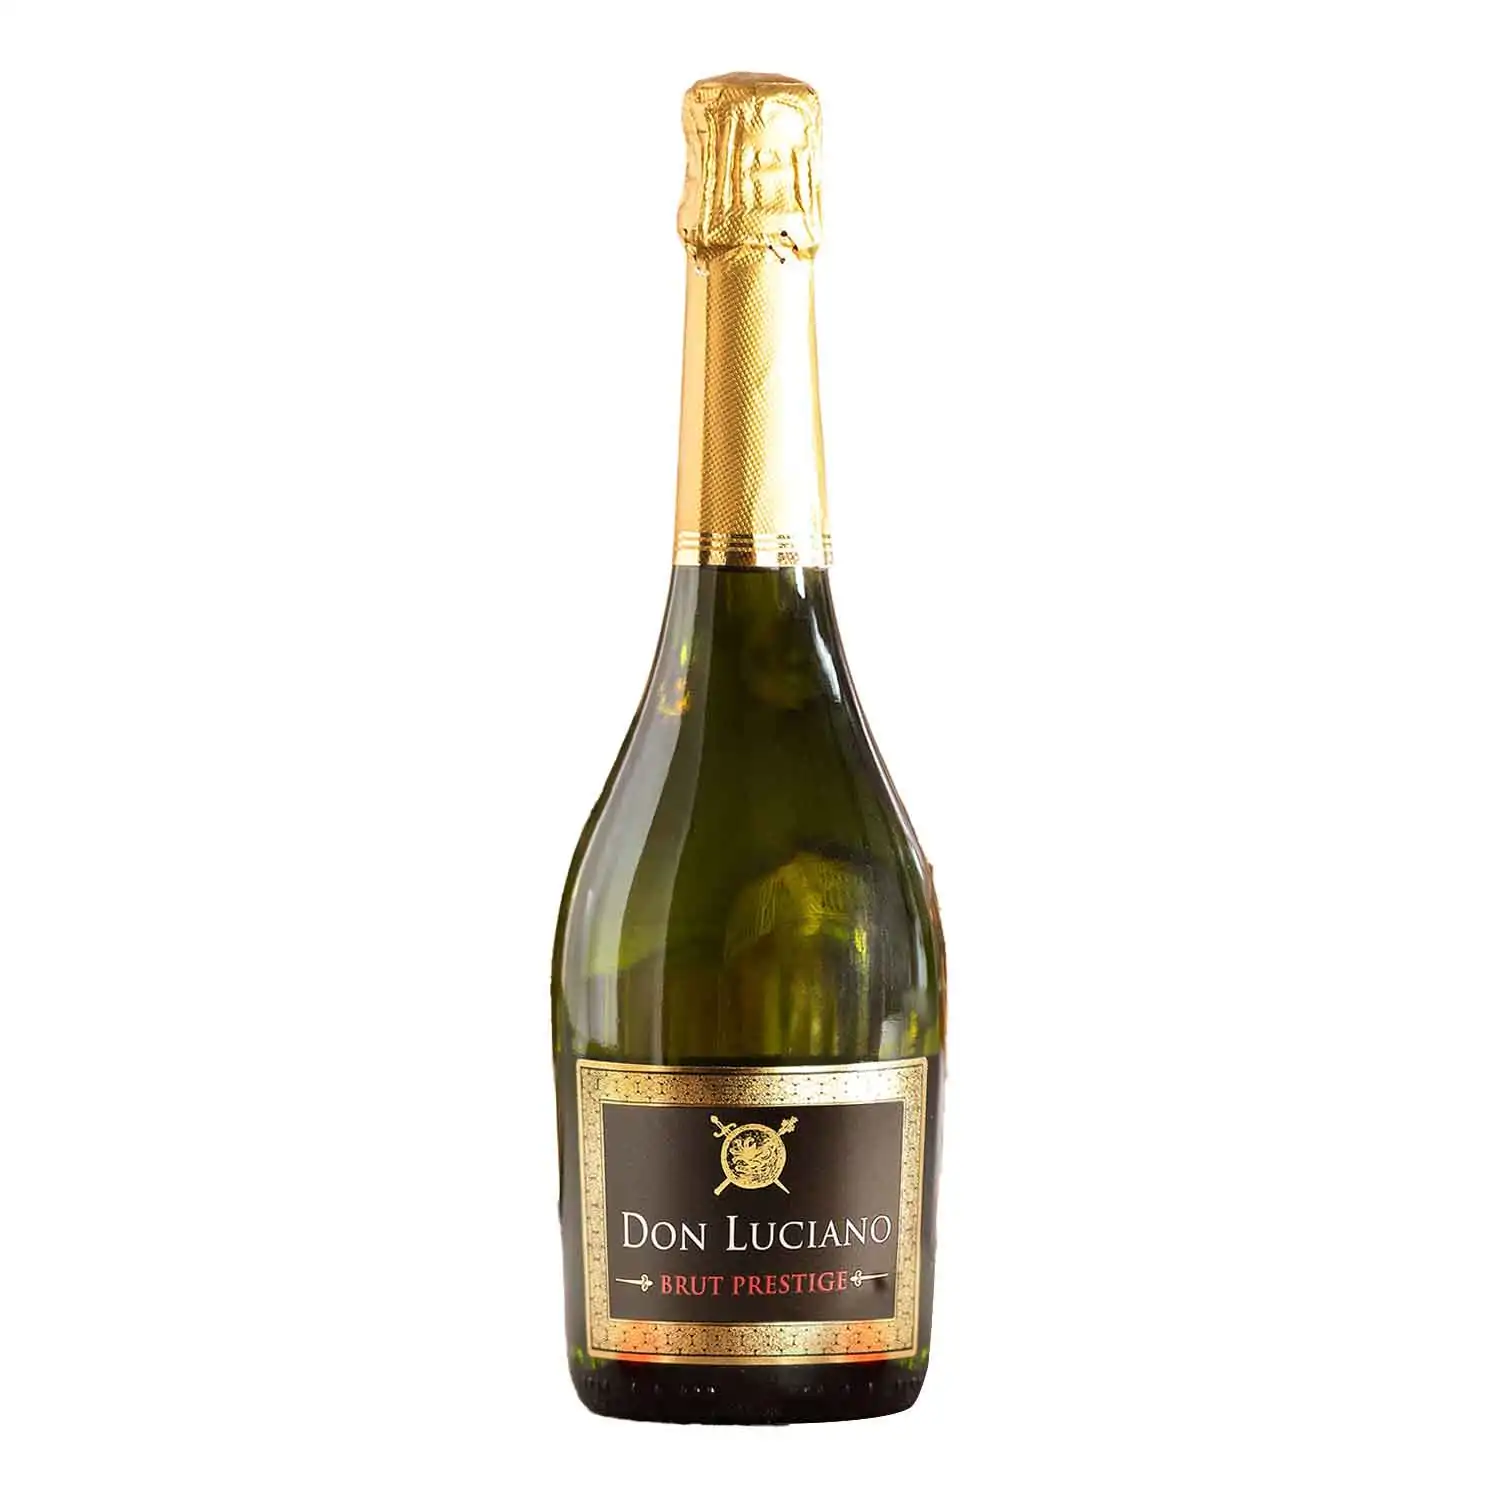 Don Luciano brut prestige 75cl Alc 8,5% - Buy at Real Tobacco